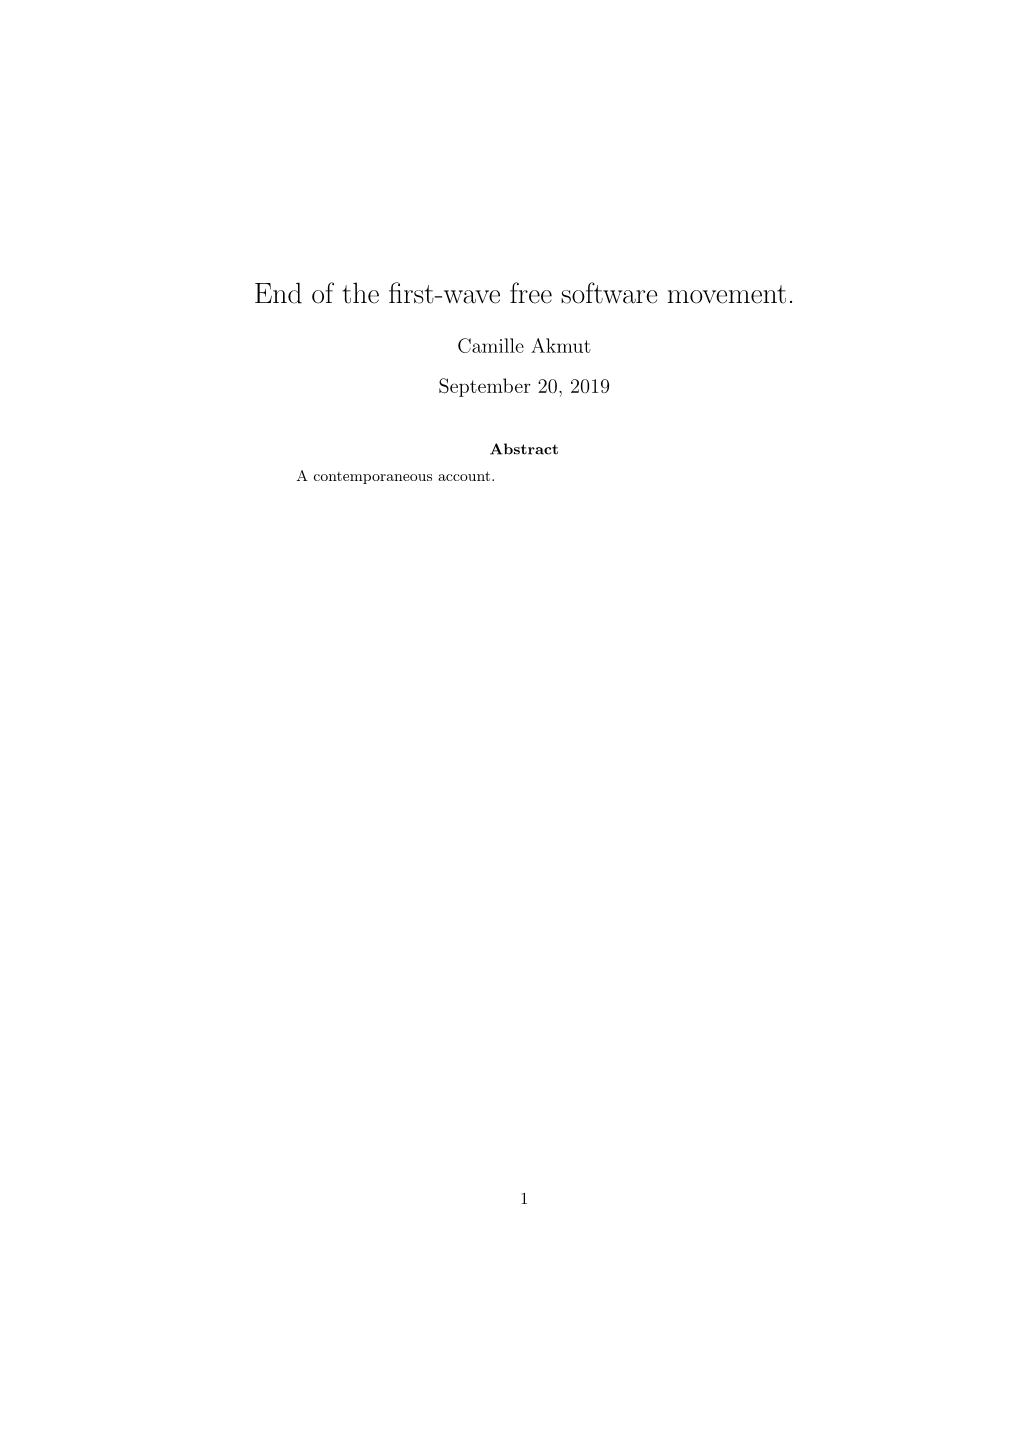 End of the First-Wave Free Software Movement